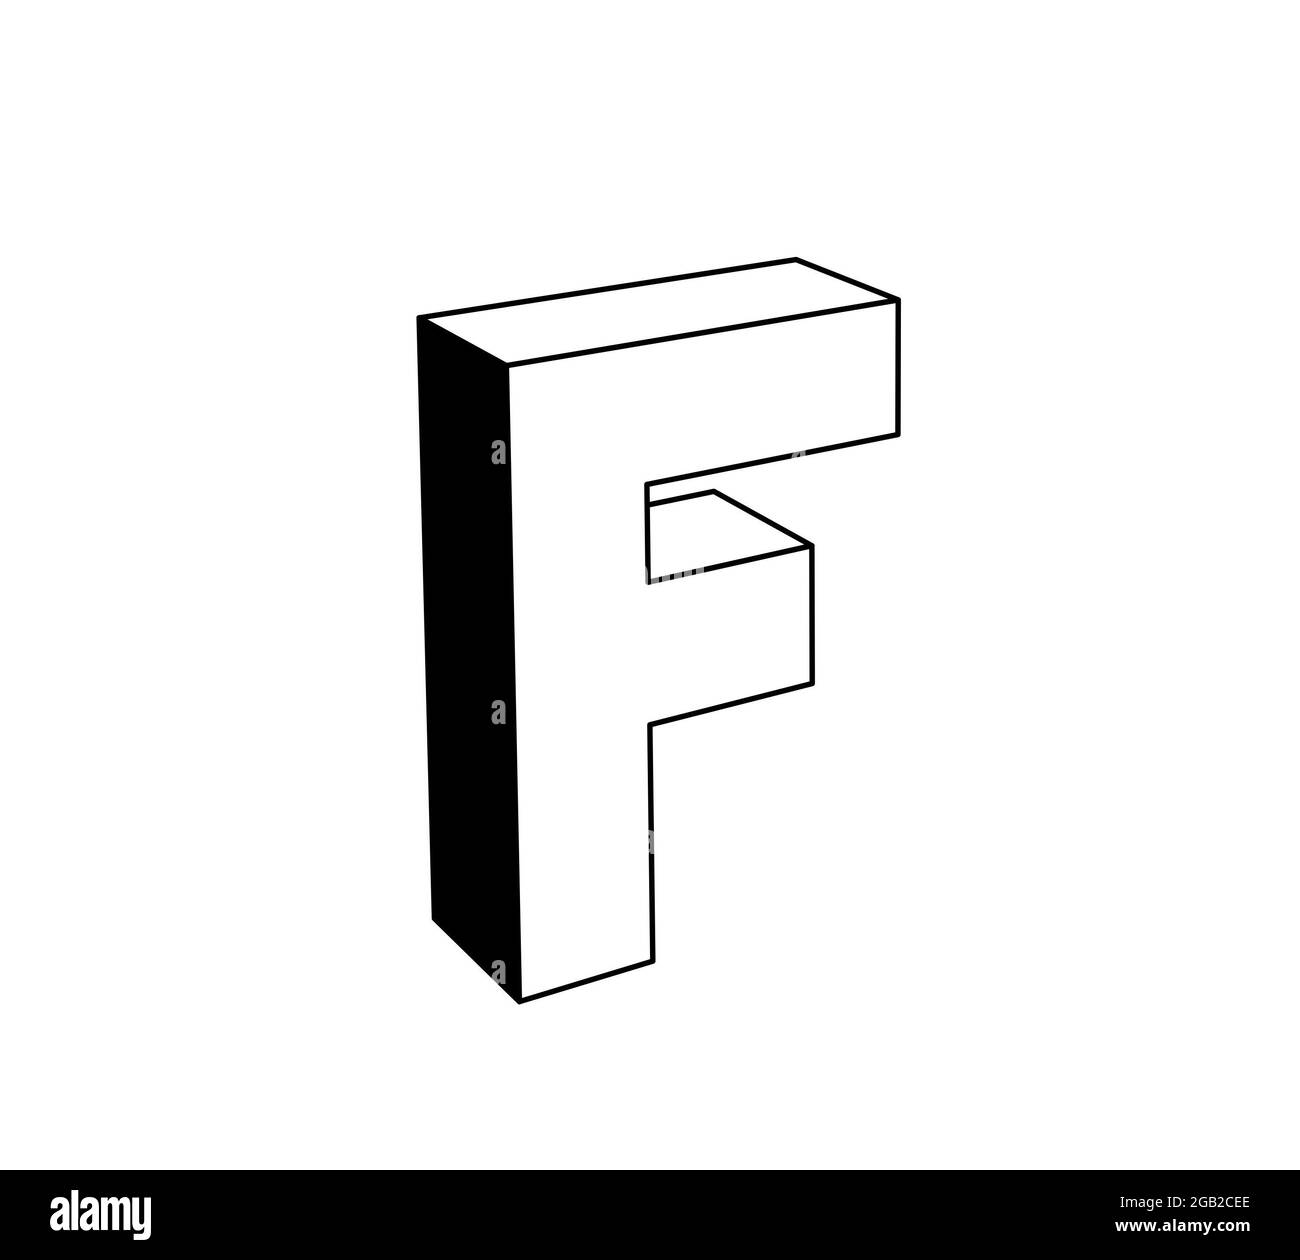 letter f, 3d black and white illustration isolated on white background. perspective view Stock Photo